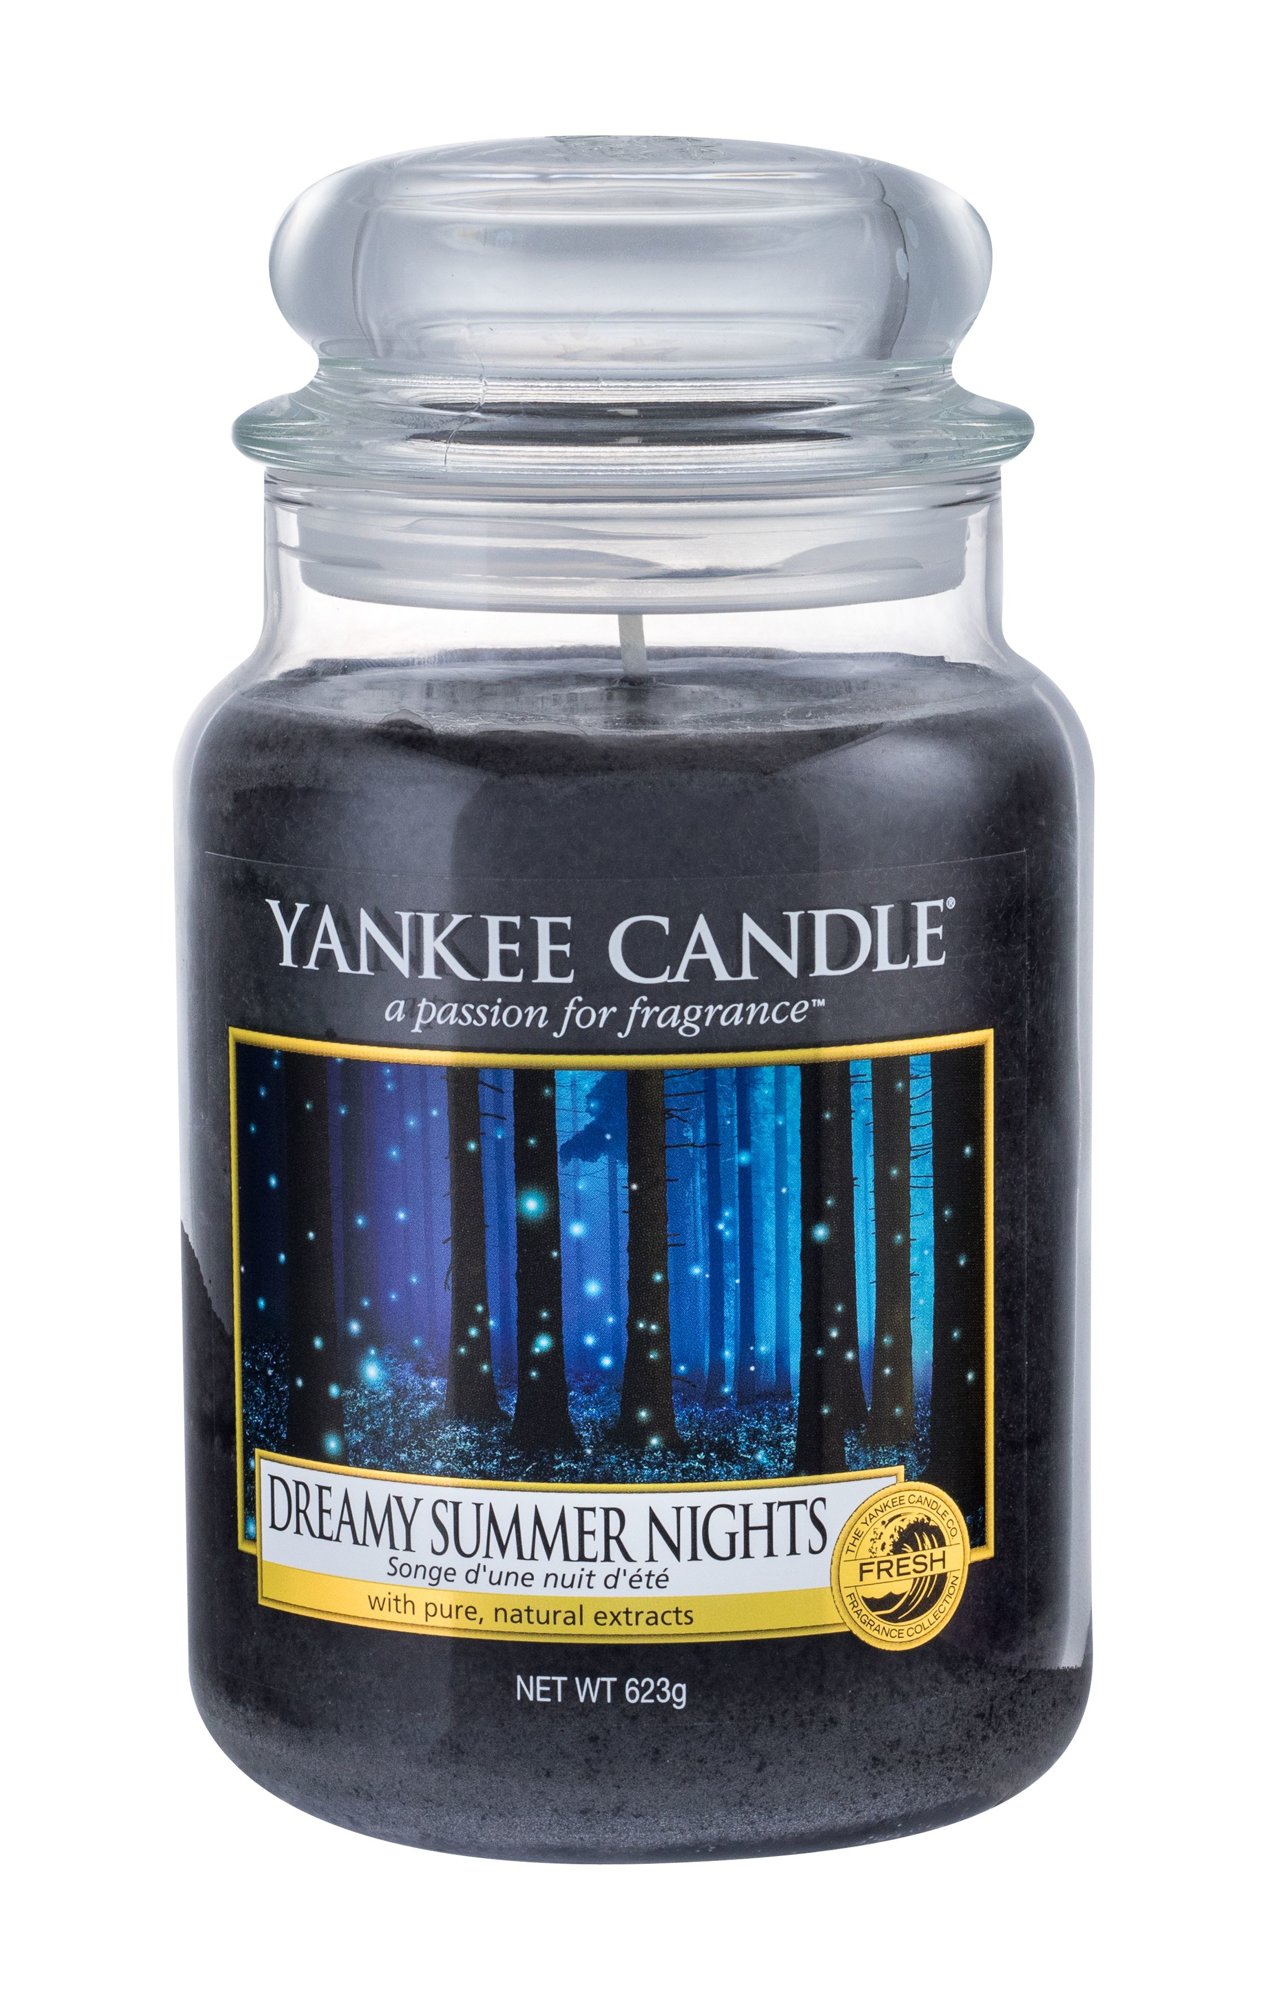 Yankee Candle Dreamy Summer Nights 623g Kvepalai Unisex Scented Candle